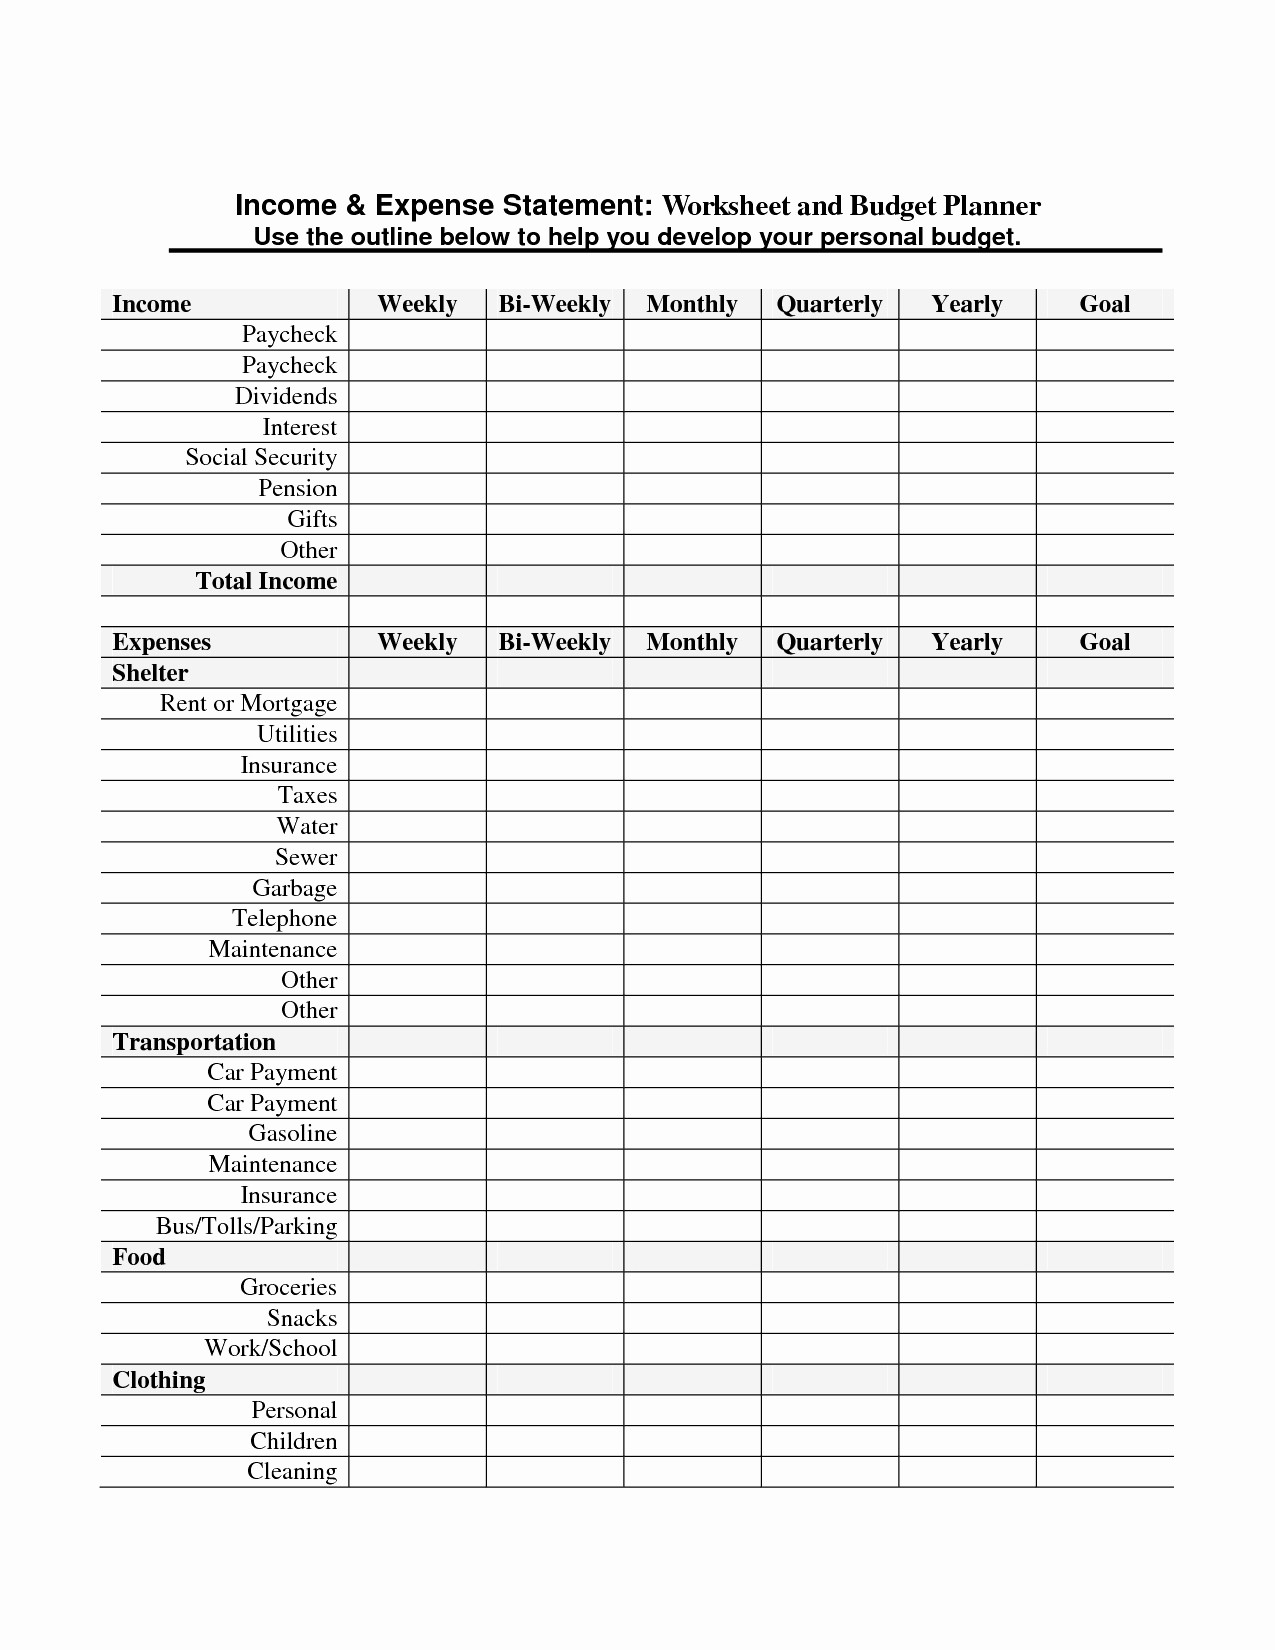 Schedule C Car And Truck Expenses Worksheet Awesome Driver Tax Document Deduction For Drivers